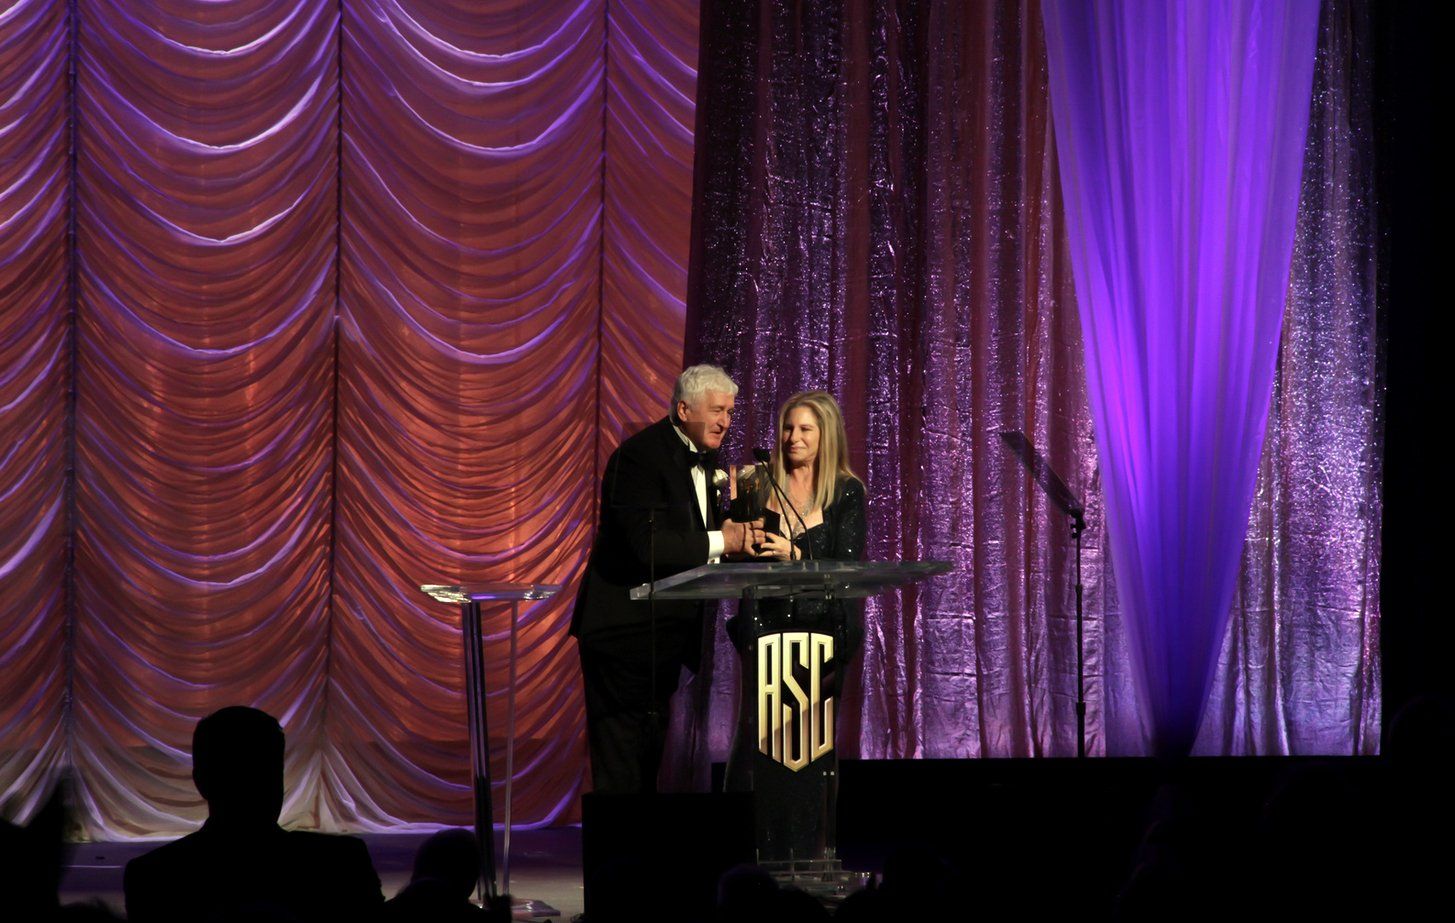 Barbra Streisand accepted the ASC Board of Governors Award from cinematographer Andrzej Bartkowiak.